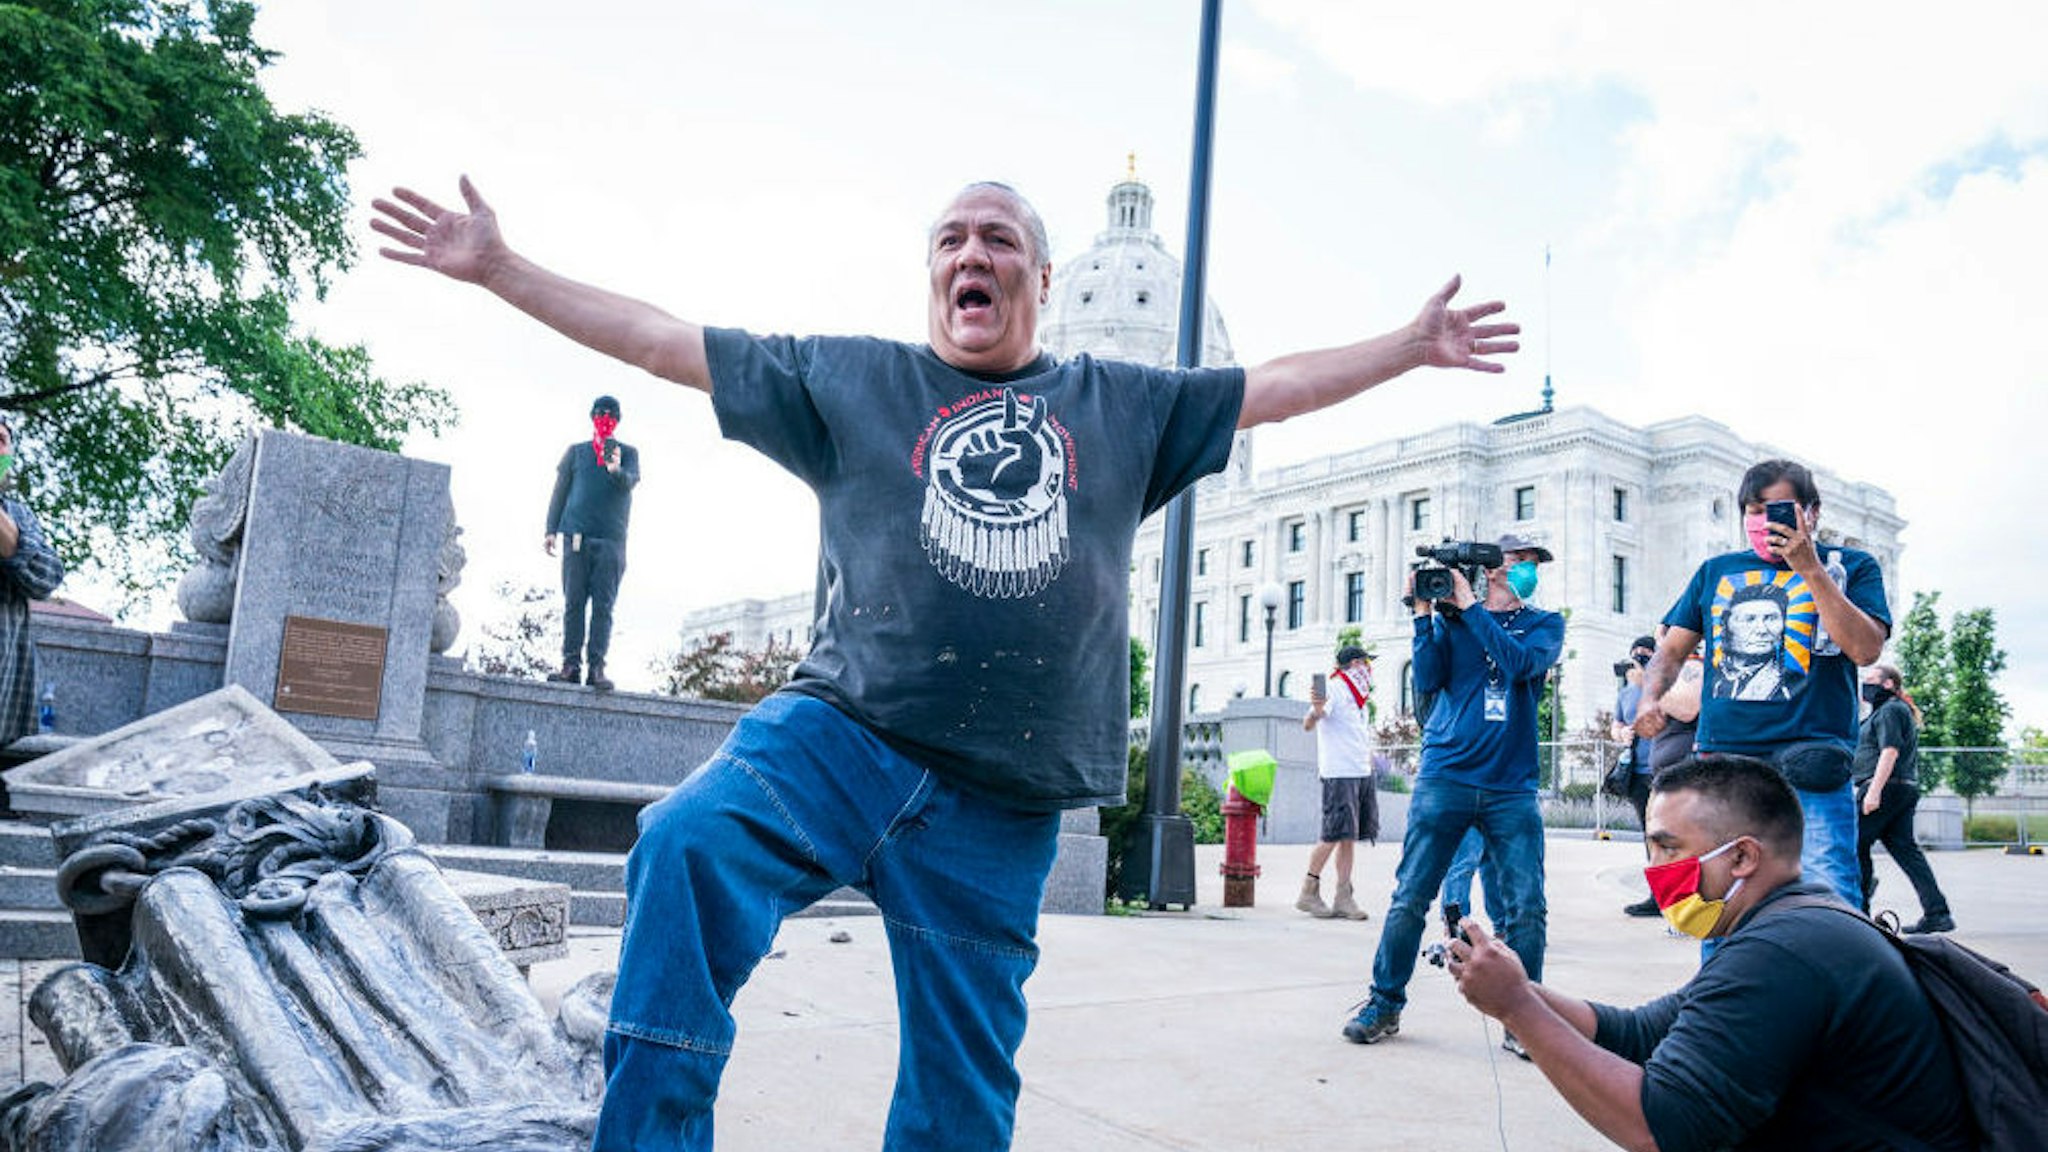 SAINT PAUL, MN,- JUNE 10: Mike Forcia, of the Black River Anishinabe, celebrated after the Christopher Columbus statue was toppled in front of the Minnesota State Capitol in St. Paul on Wednesday, June 10, 2020.